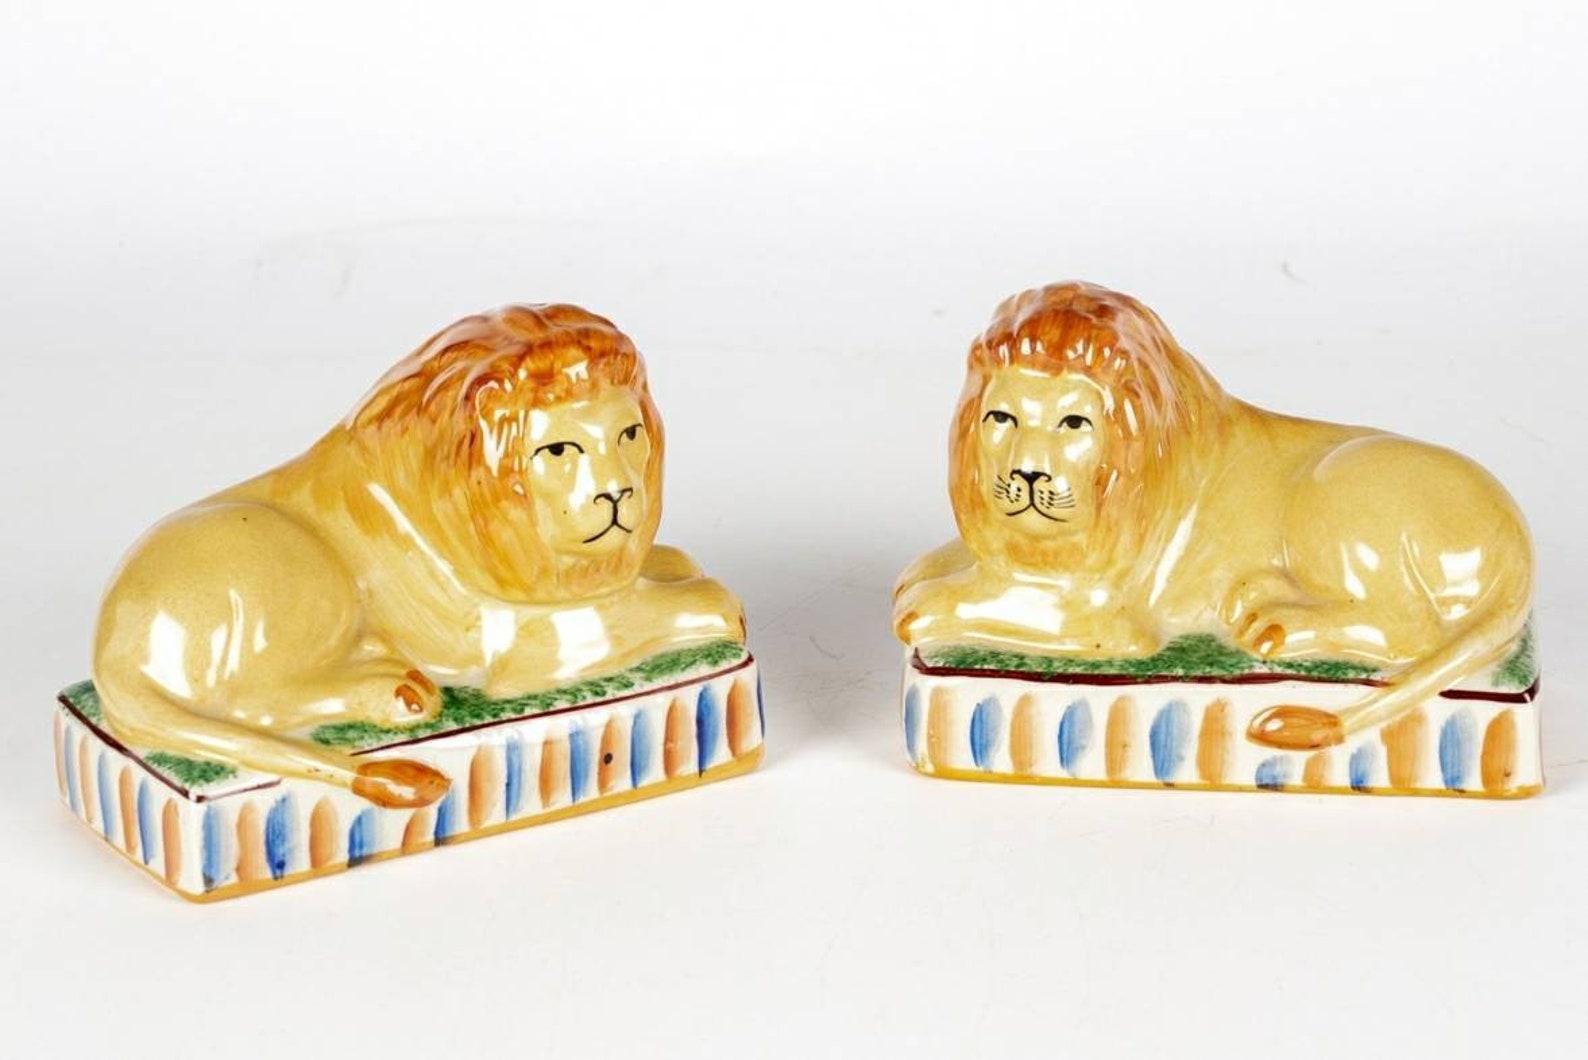 A charming original pair of antique Staffordshire style recumbent lions on striped rectangular plinths. Hand-crafted, rich coloring with beautifully aged patina, desirable crazing adds lovely unique character. Very good condition. 

Dimensions: